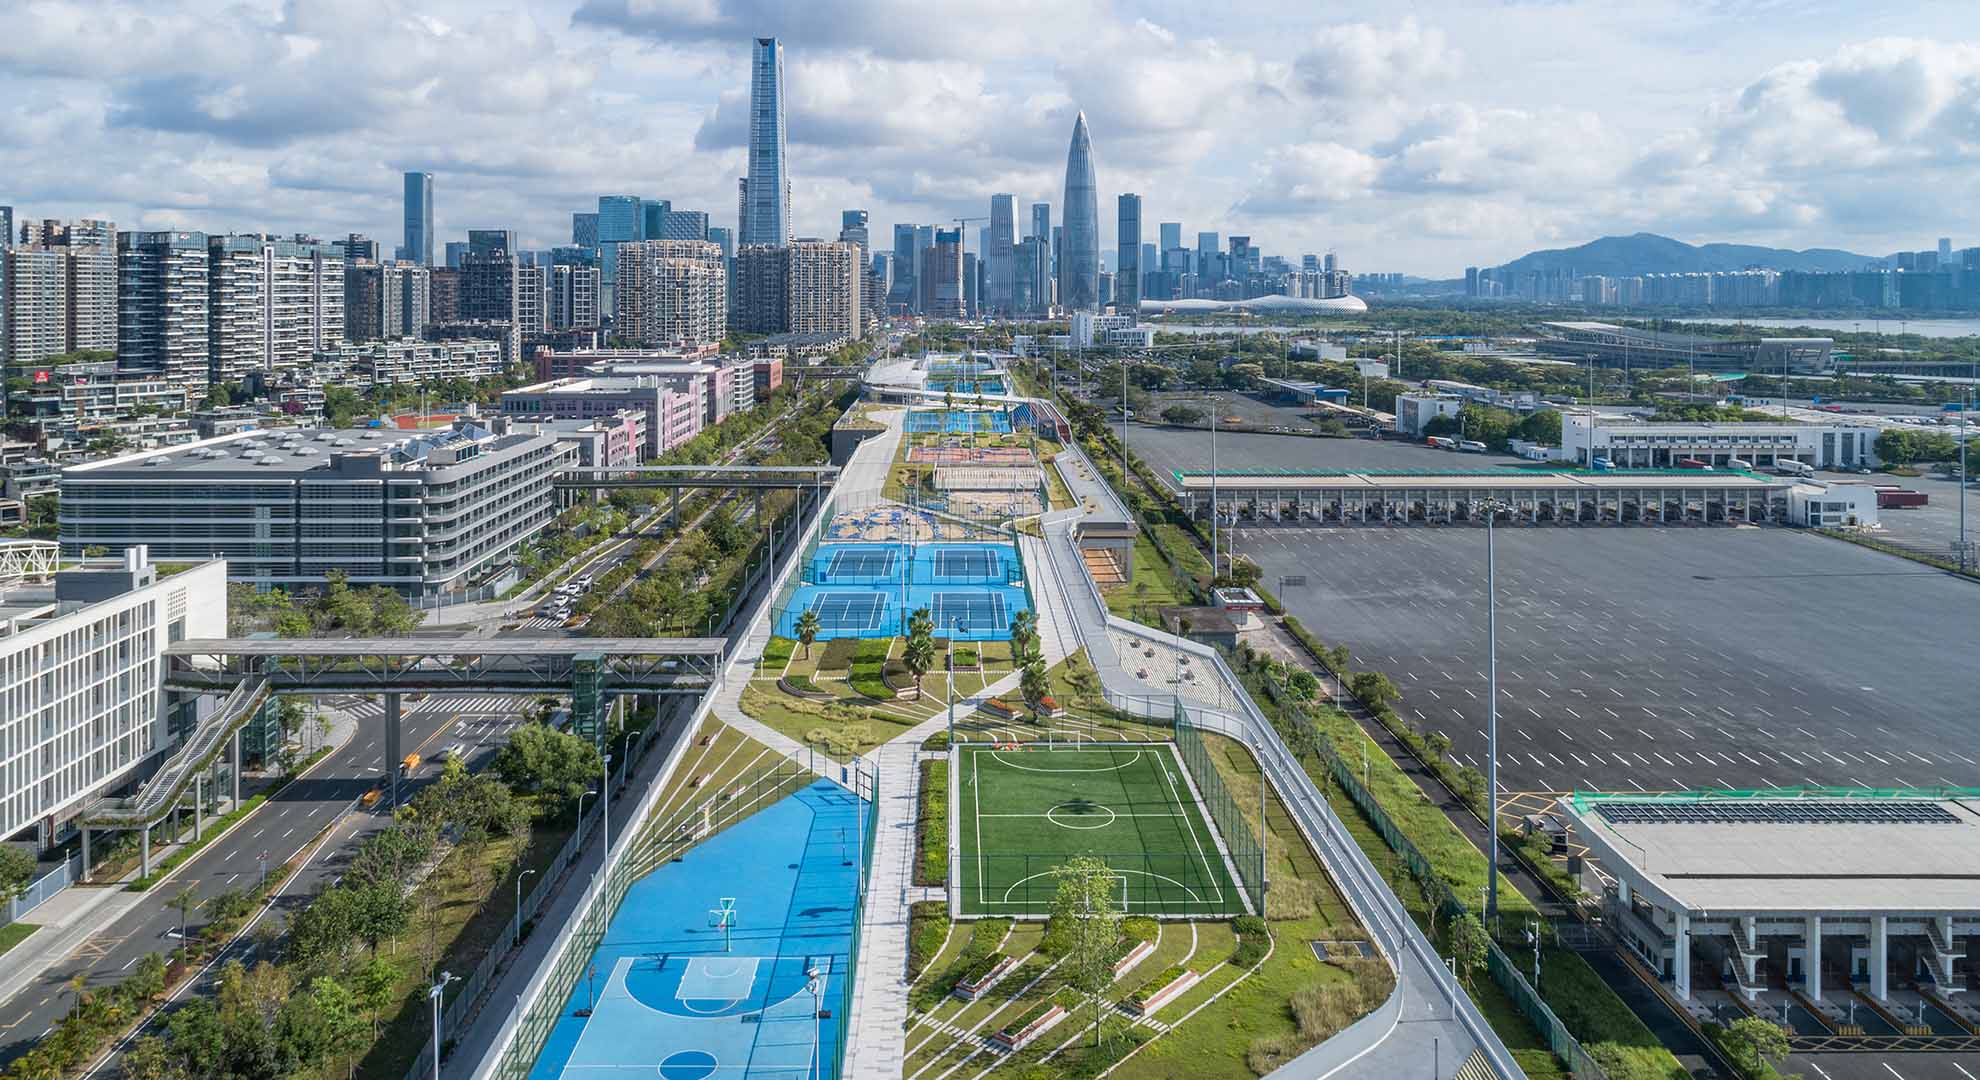 Public infrastructure well integrated into the environment in China.